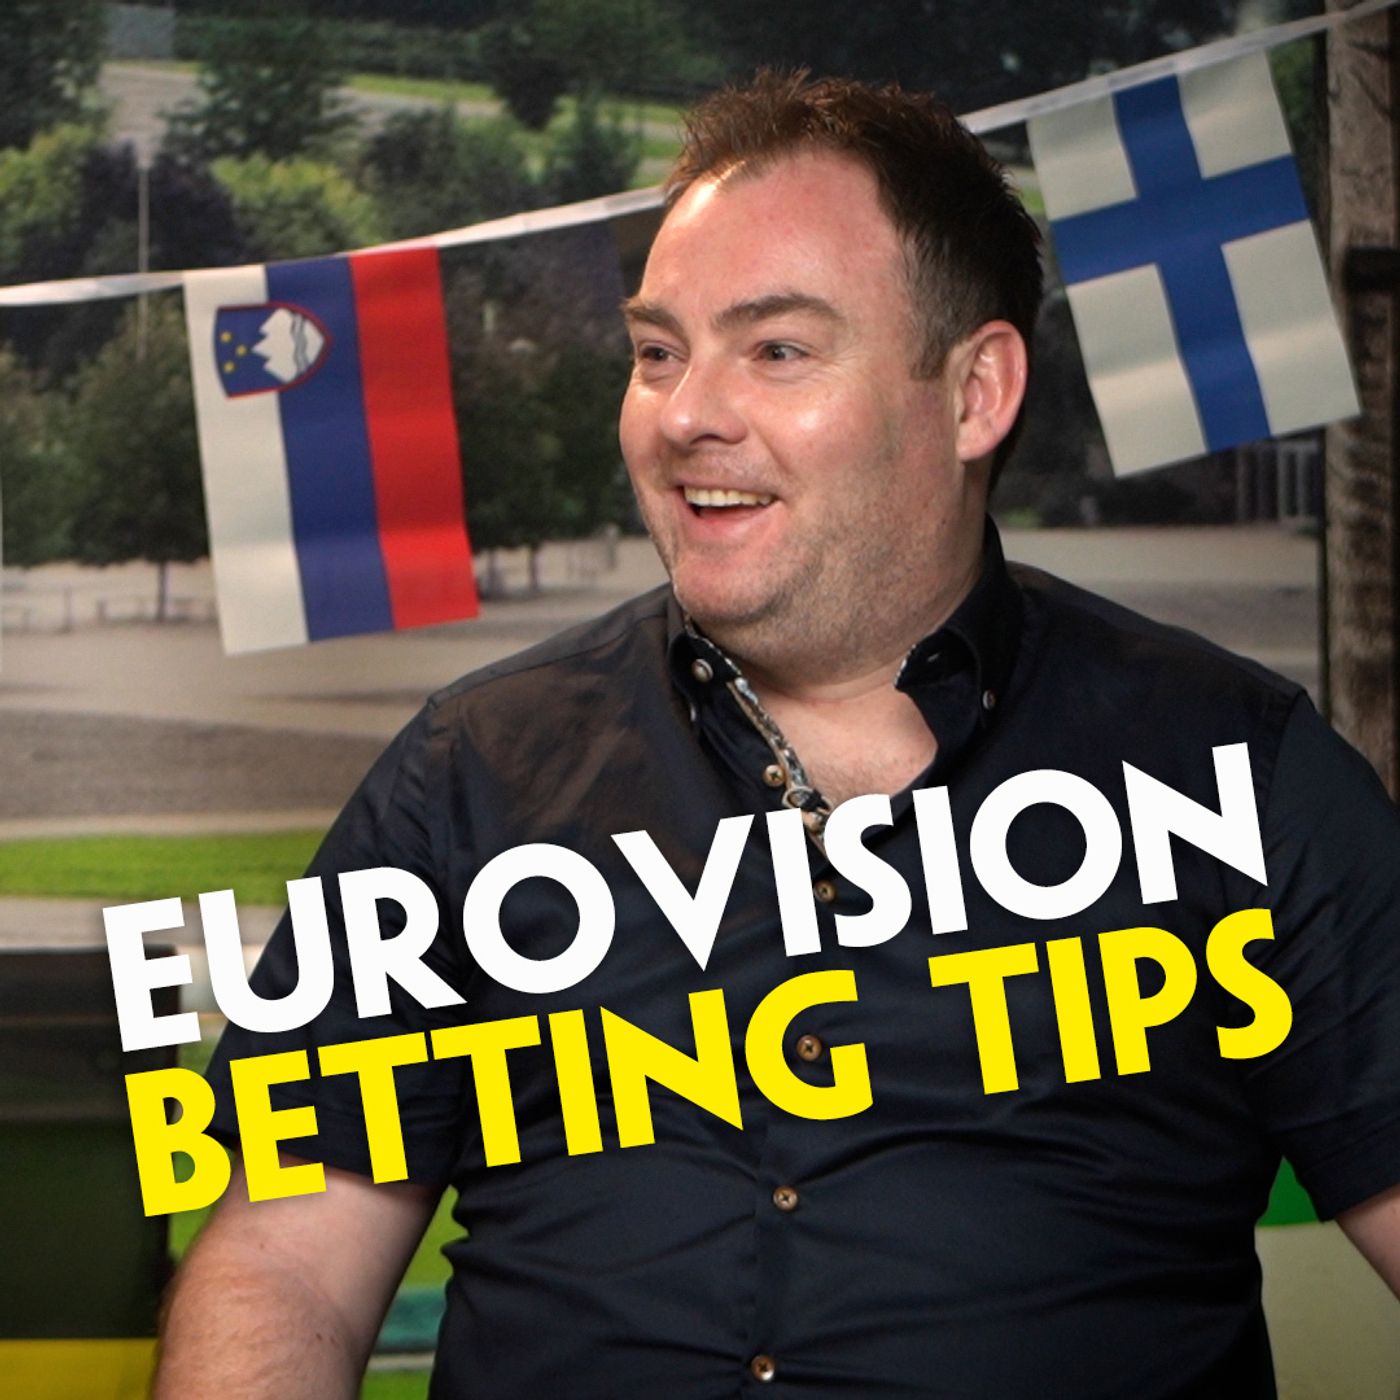 516: EUROVISION BETTING SPECIAL | Frank Hickey | Stephen Cass | Eurovision Betting Tips | Shrewdies Only!